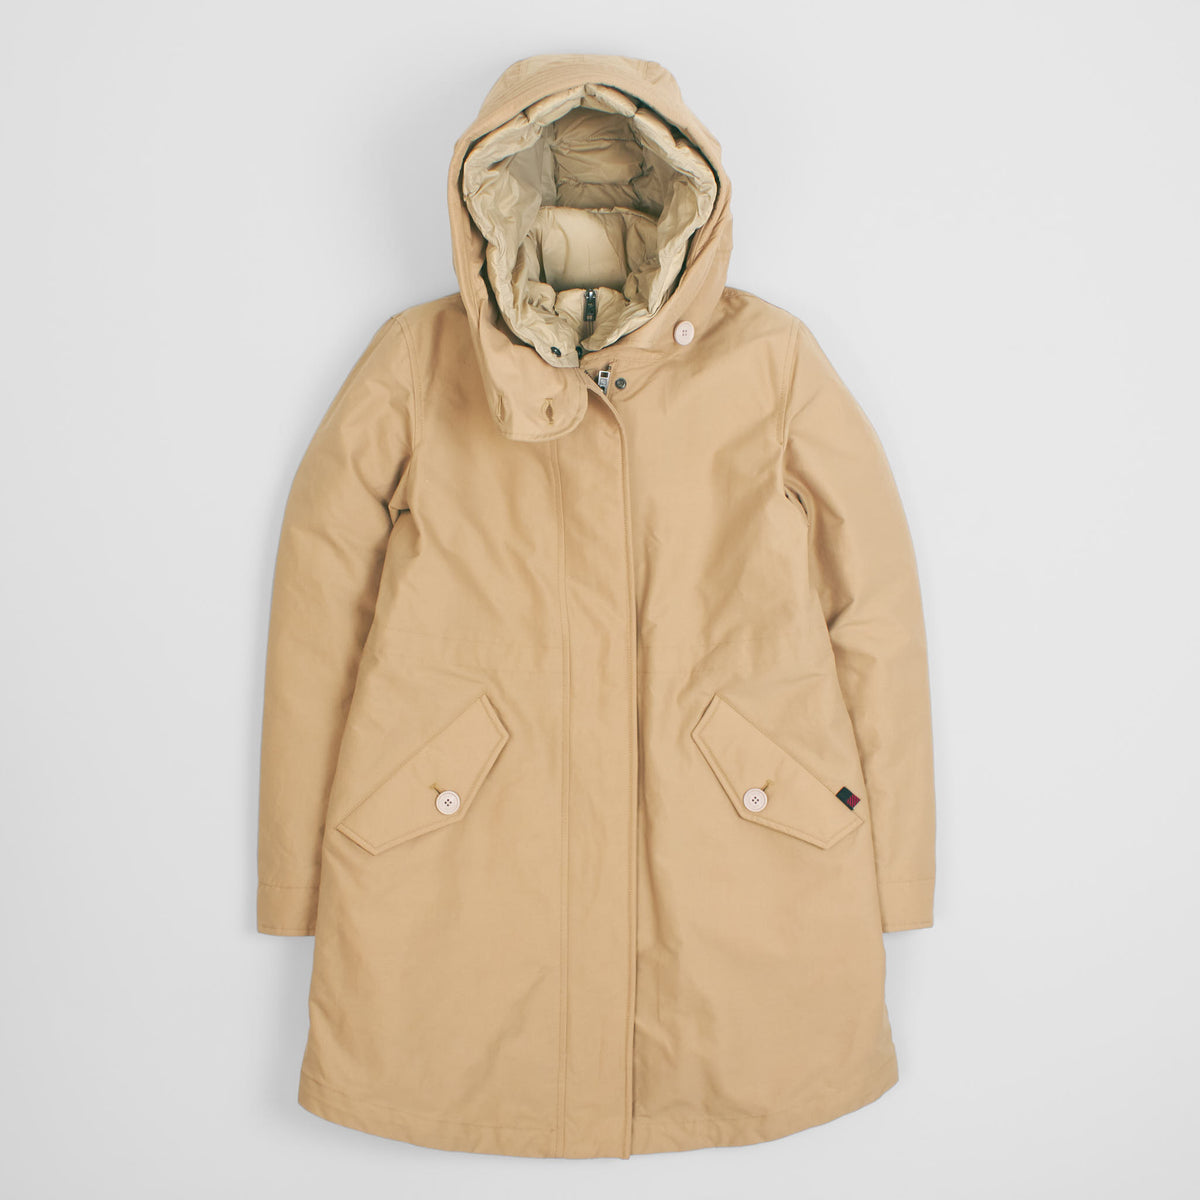 Woolrich Ladies Long Military 3 in 1 Parka